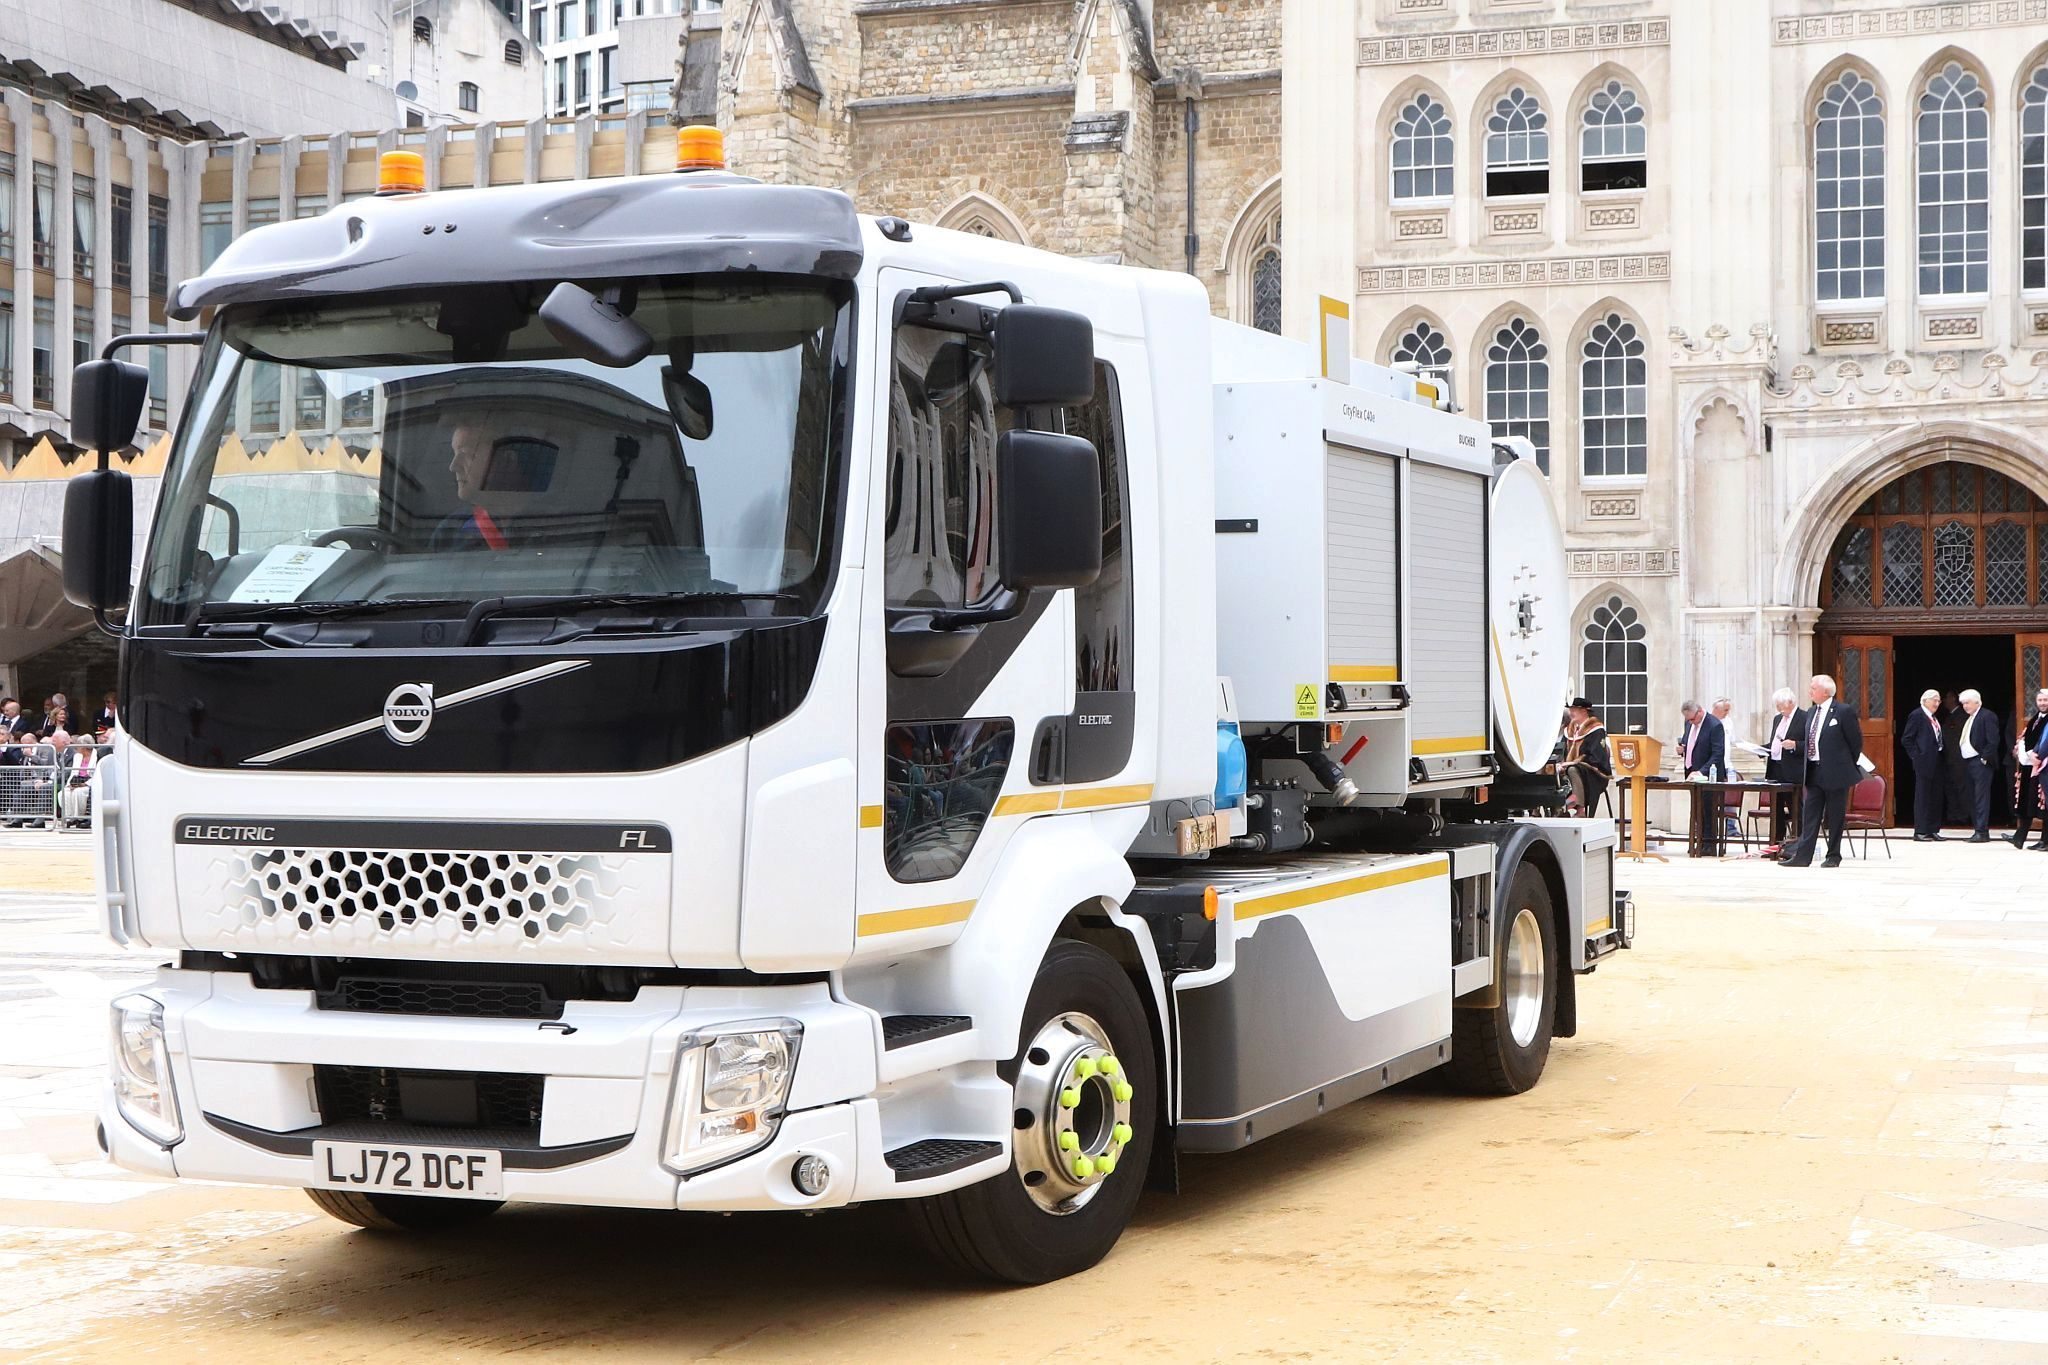 Volvo PE 2021 LJ72DCF. City of London 2023 Cart Marking in Guildhall Yard on 22-Jul-2023. Hosted by the Worshipful Company of Carmen with the Lord Mayor of the City of London in attendance. Wooden plates on the vehicles are branded with hot irons to allow them to ply for trade in the Square Mile. Another of the City Livery Company's annual ceremonies.